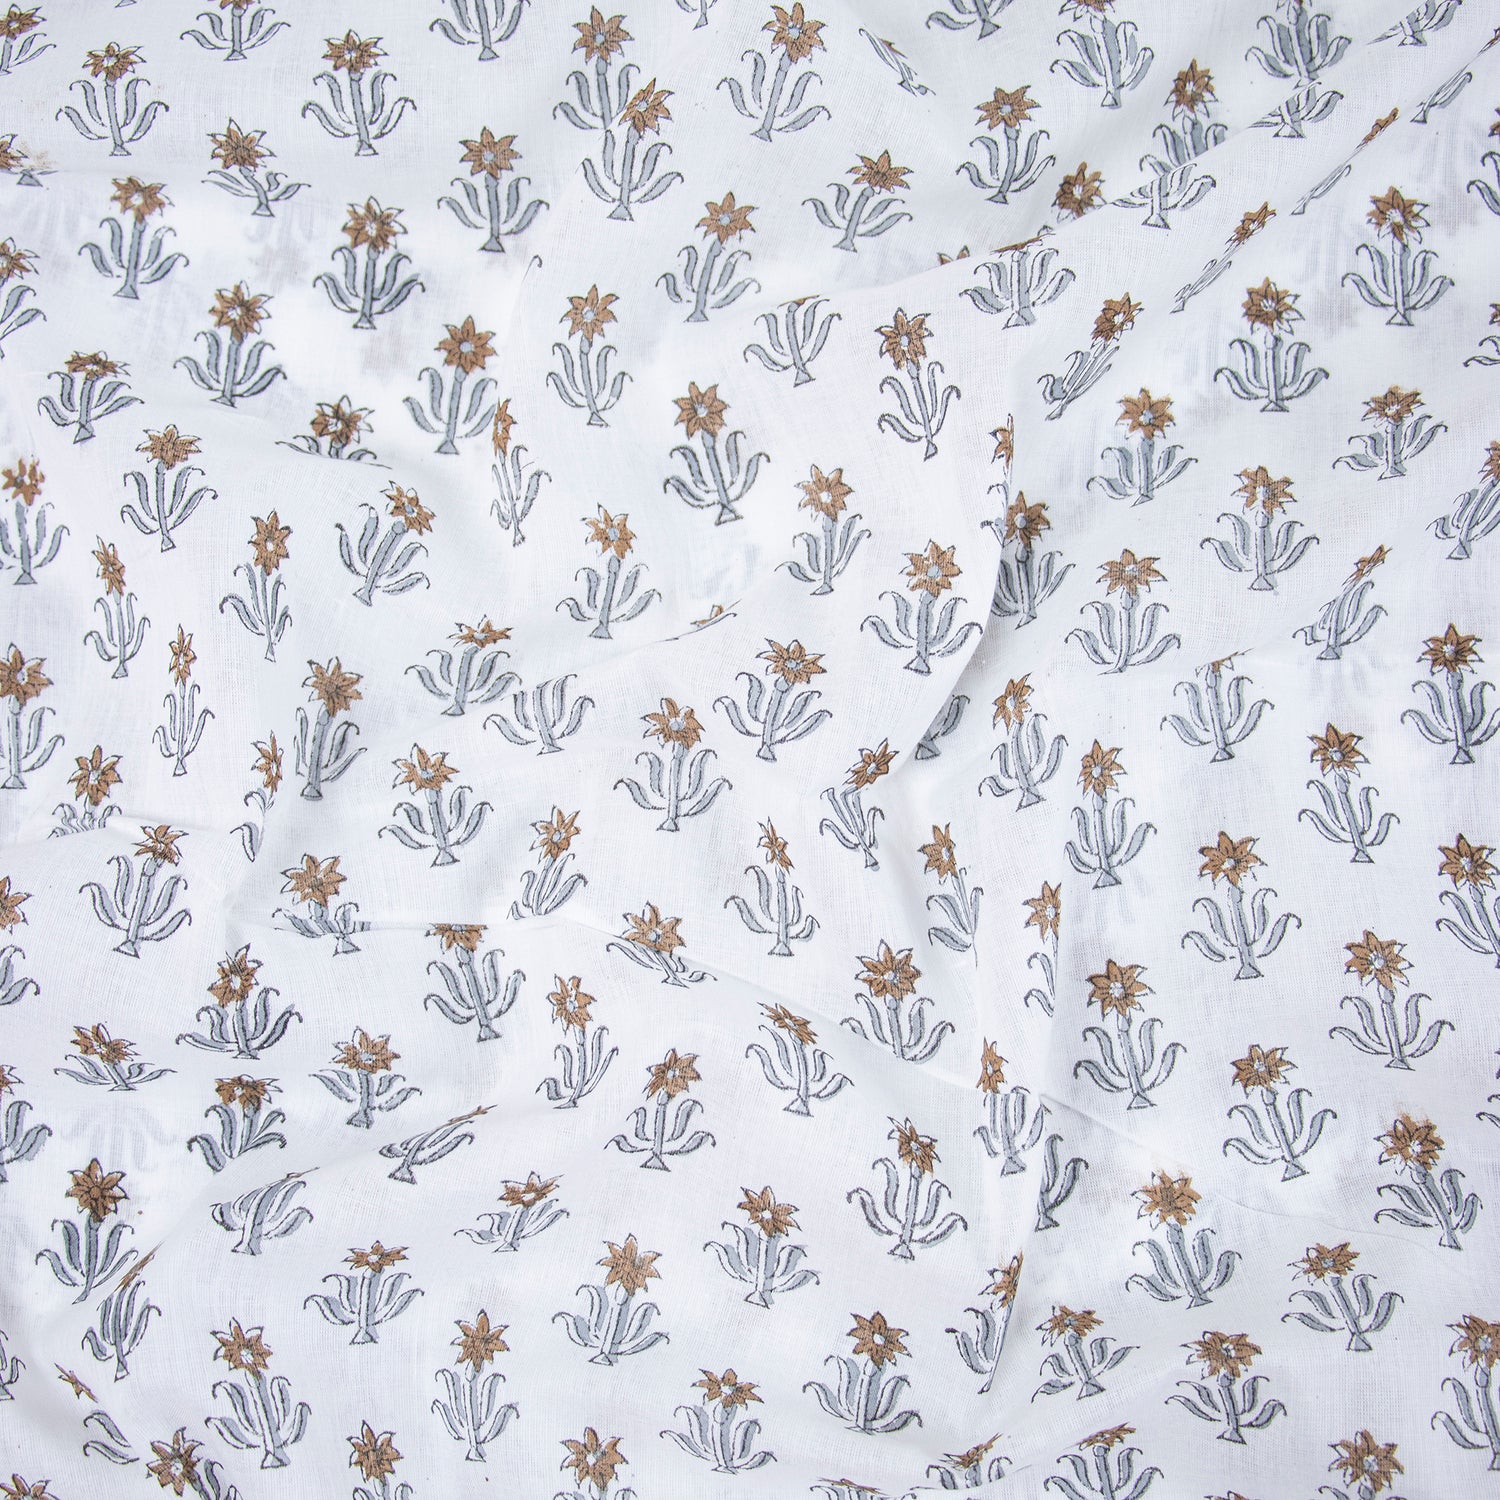 Handmade Brown Floral Print Best Cotton Fabric in India